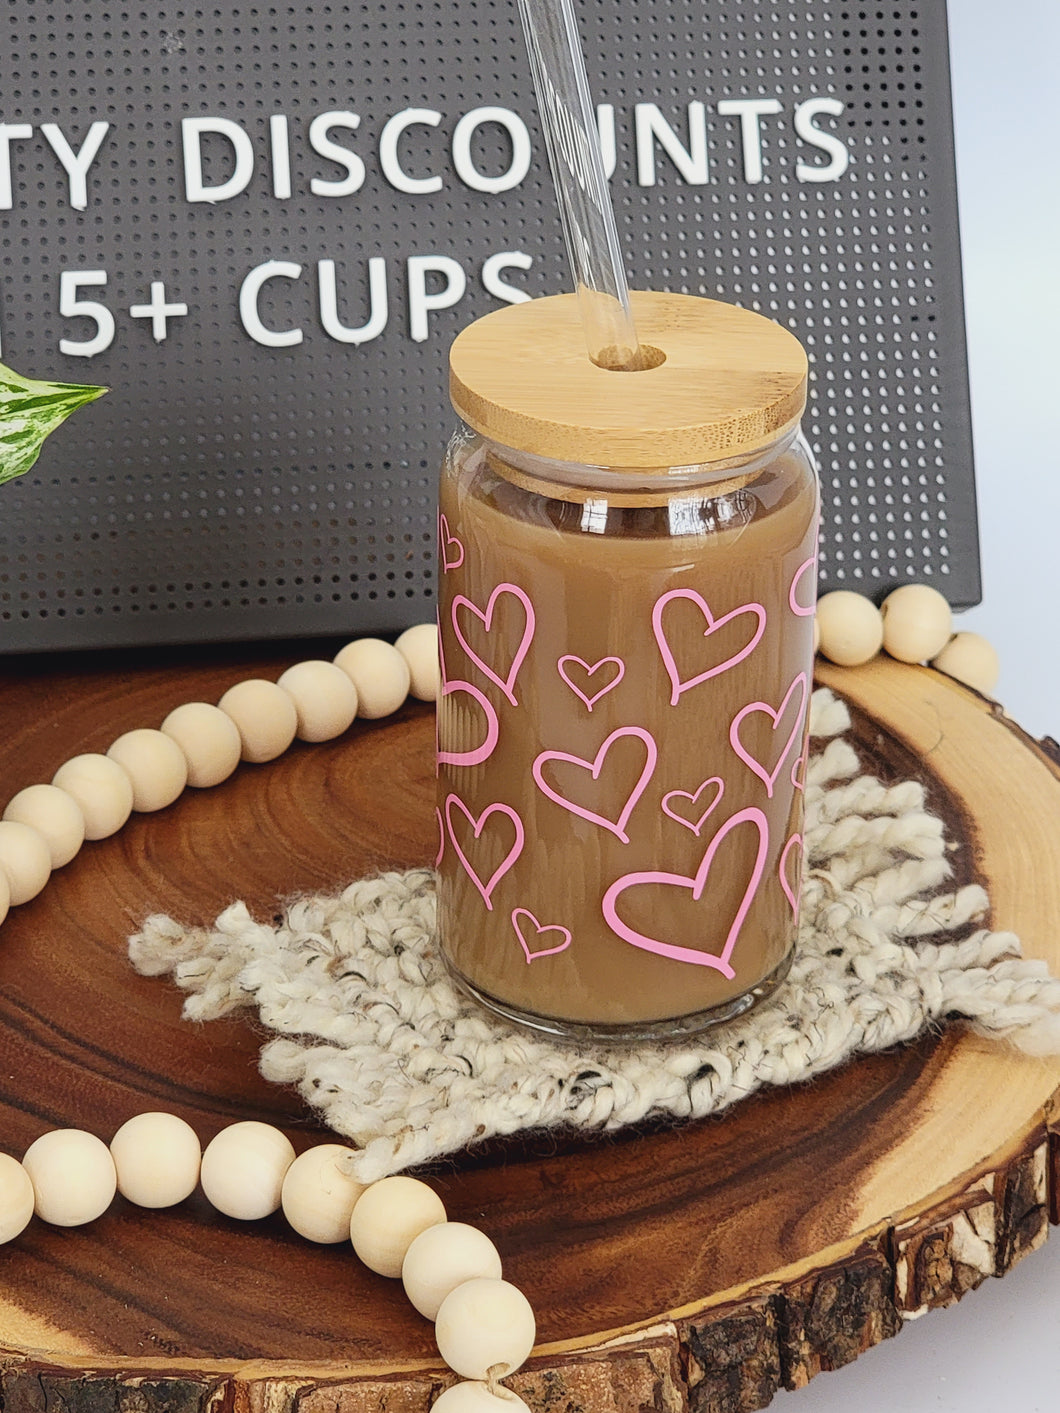 16oz glass beer can shown with hearts design covering entire surface. Also shown with bamboo lid and glass straw.